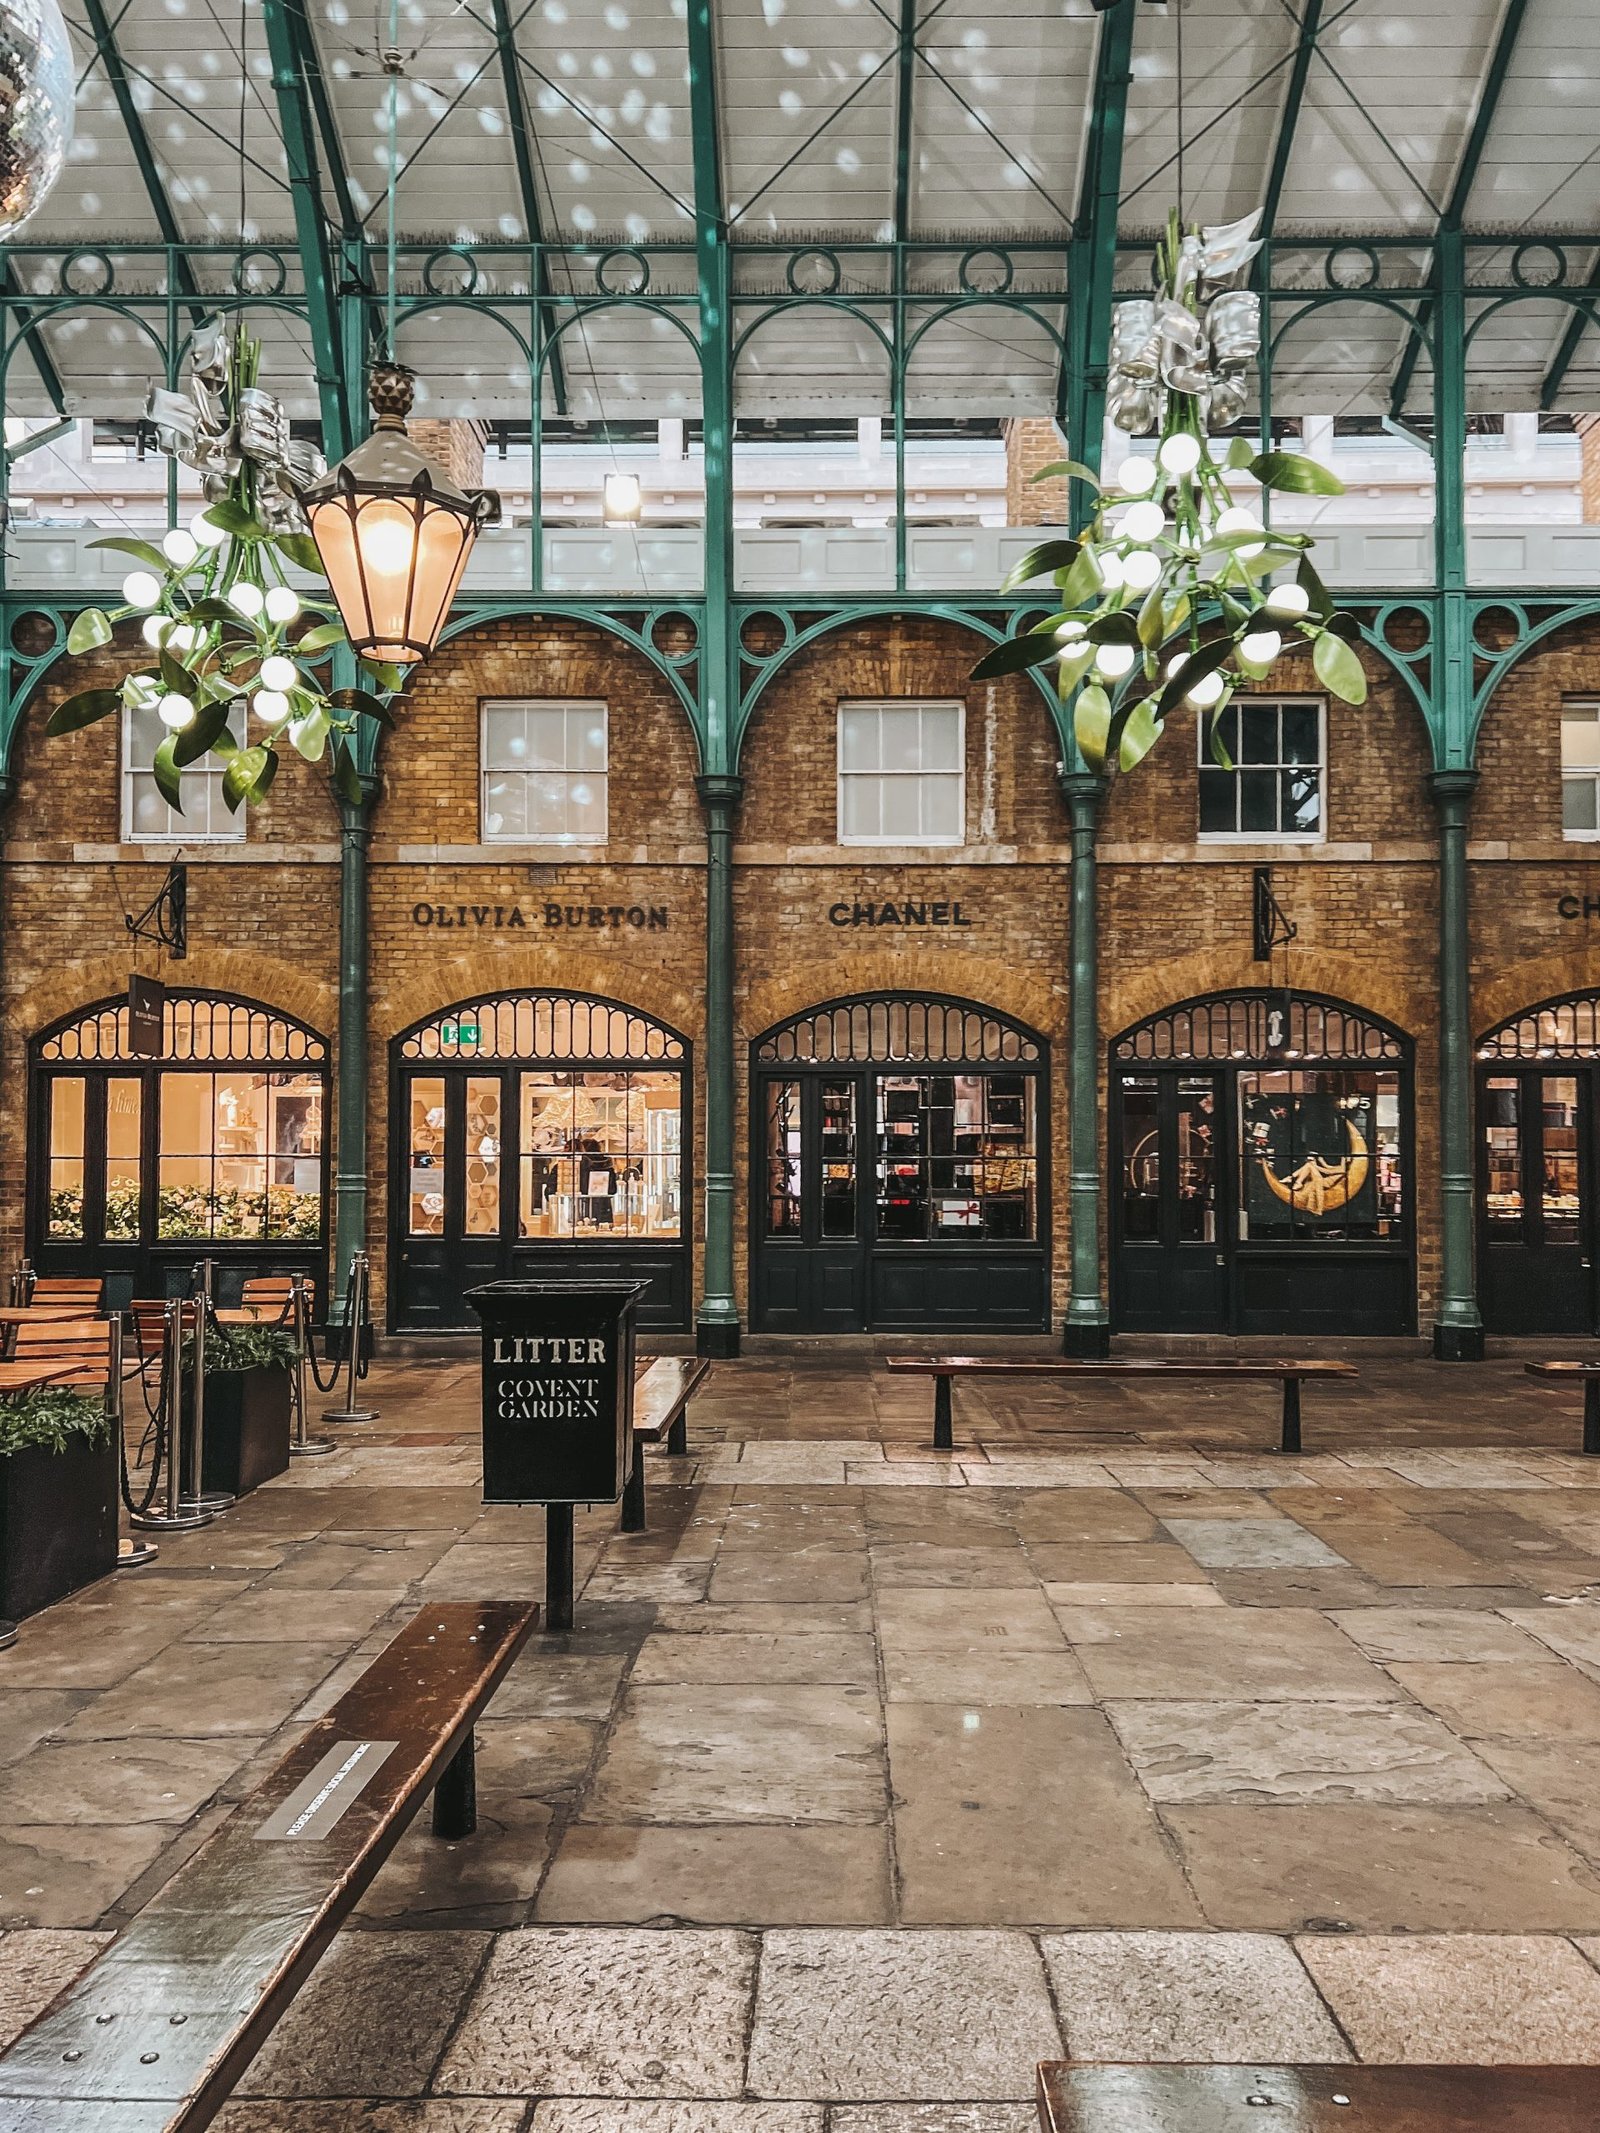 Coven Garden Most instagrammed places in London 